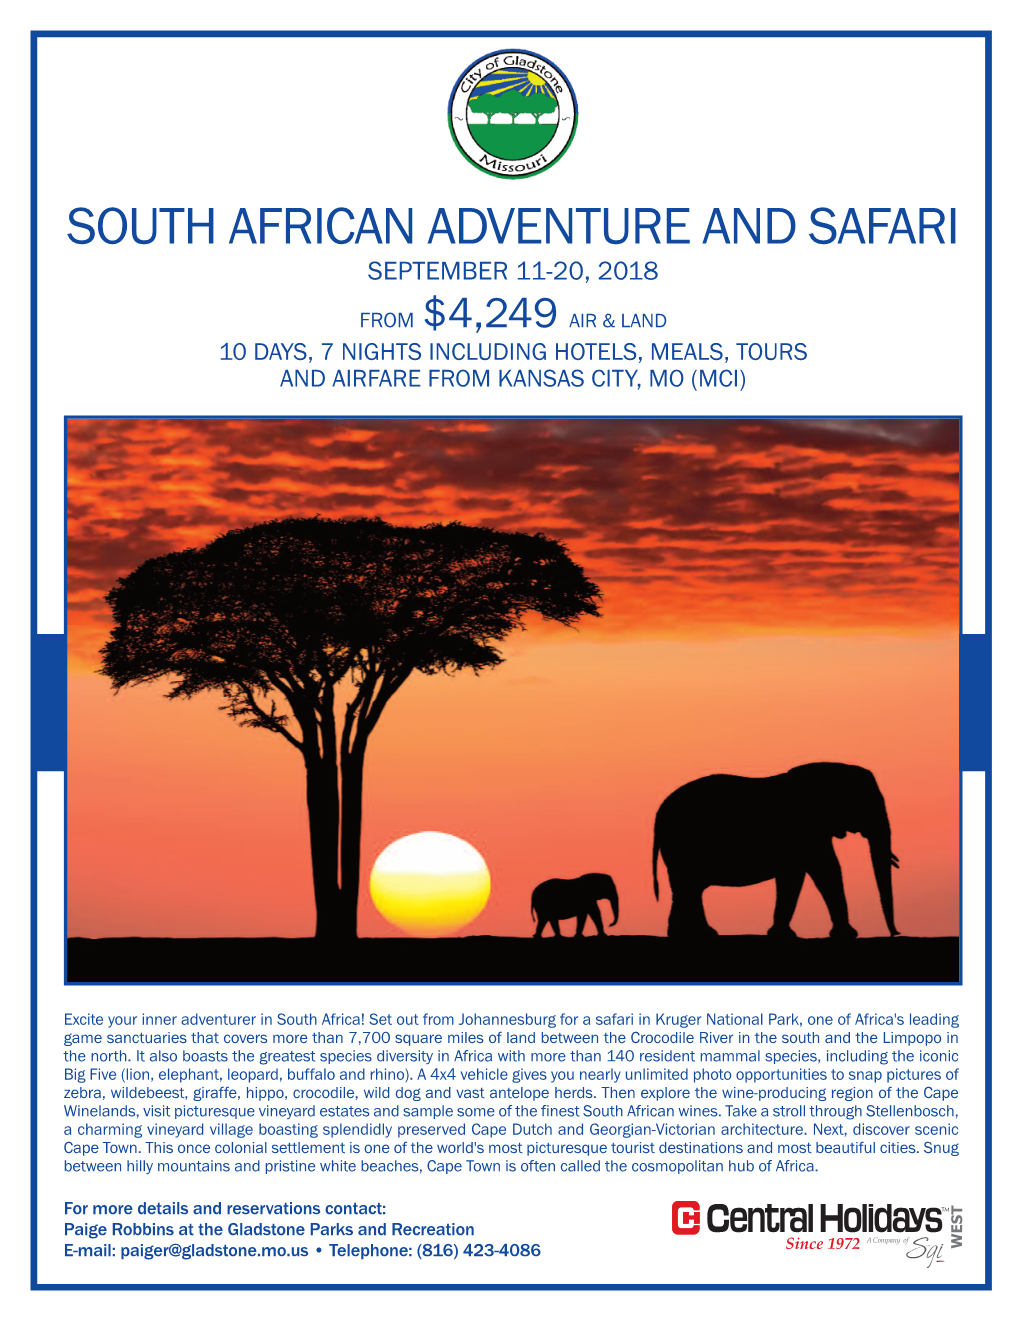 South African Adventure and Safari